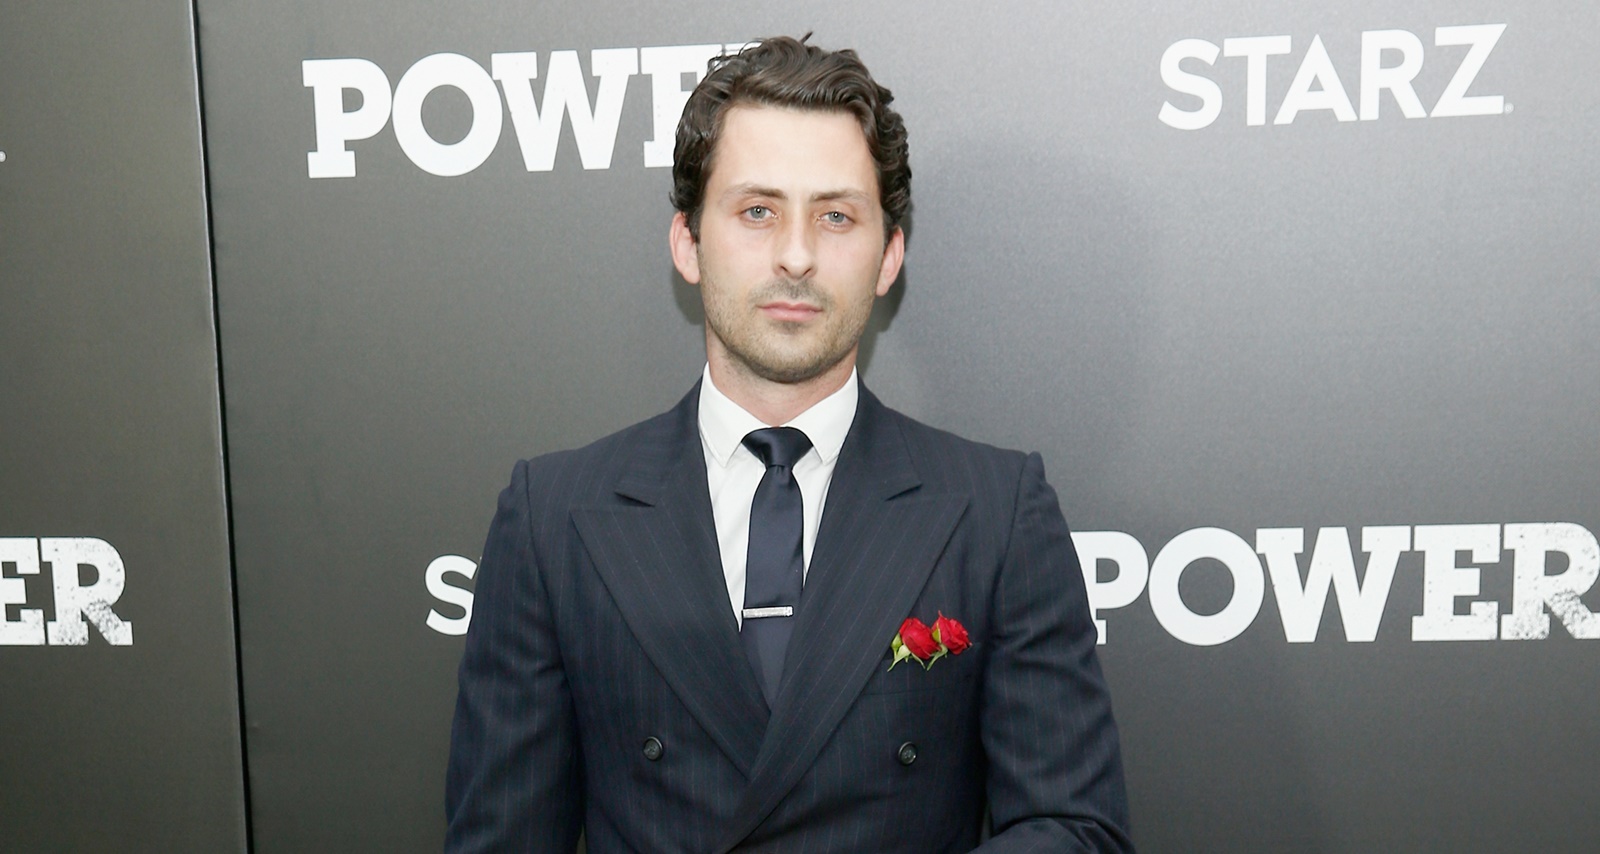 Andy Bean Wiki, Age, Education, Early Life, Partner, “Swamp Thing”